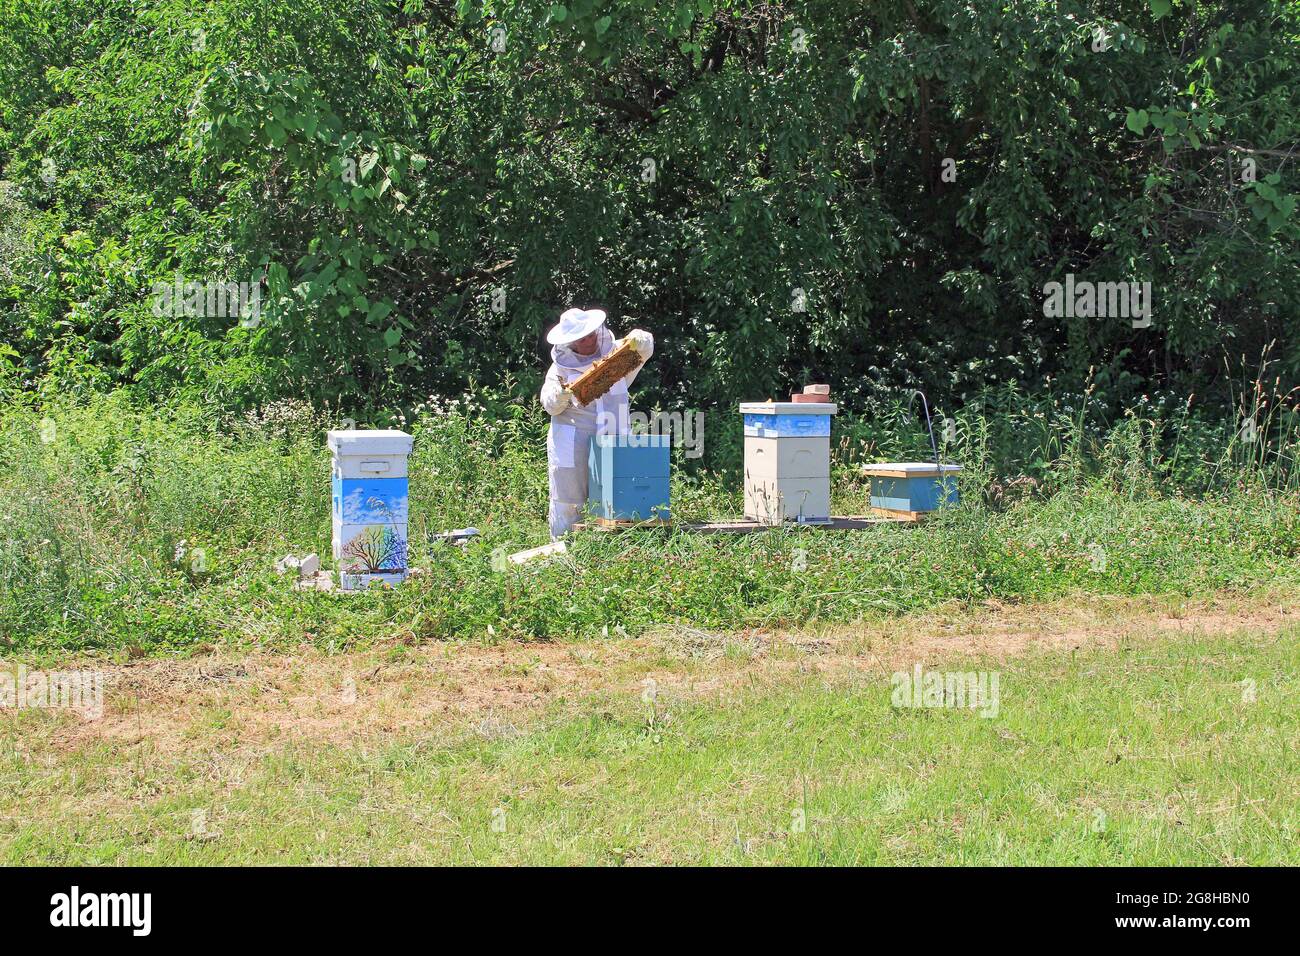 Beekeeper Working in her Bee Yard Checking Hives Stock Photo